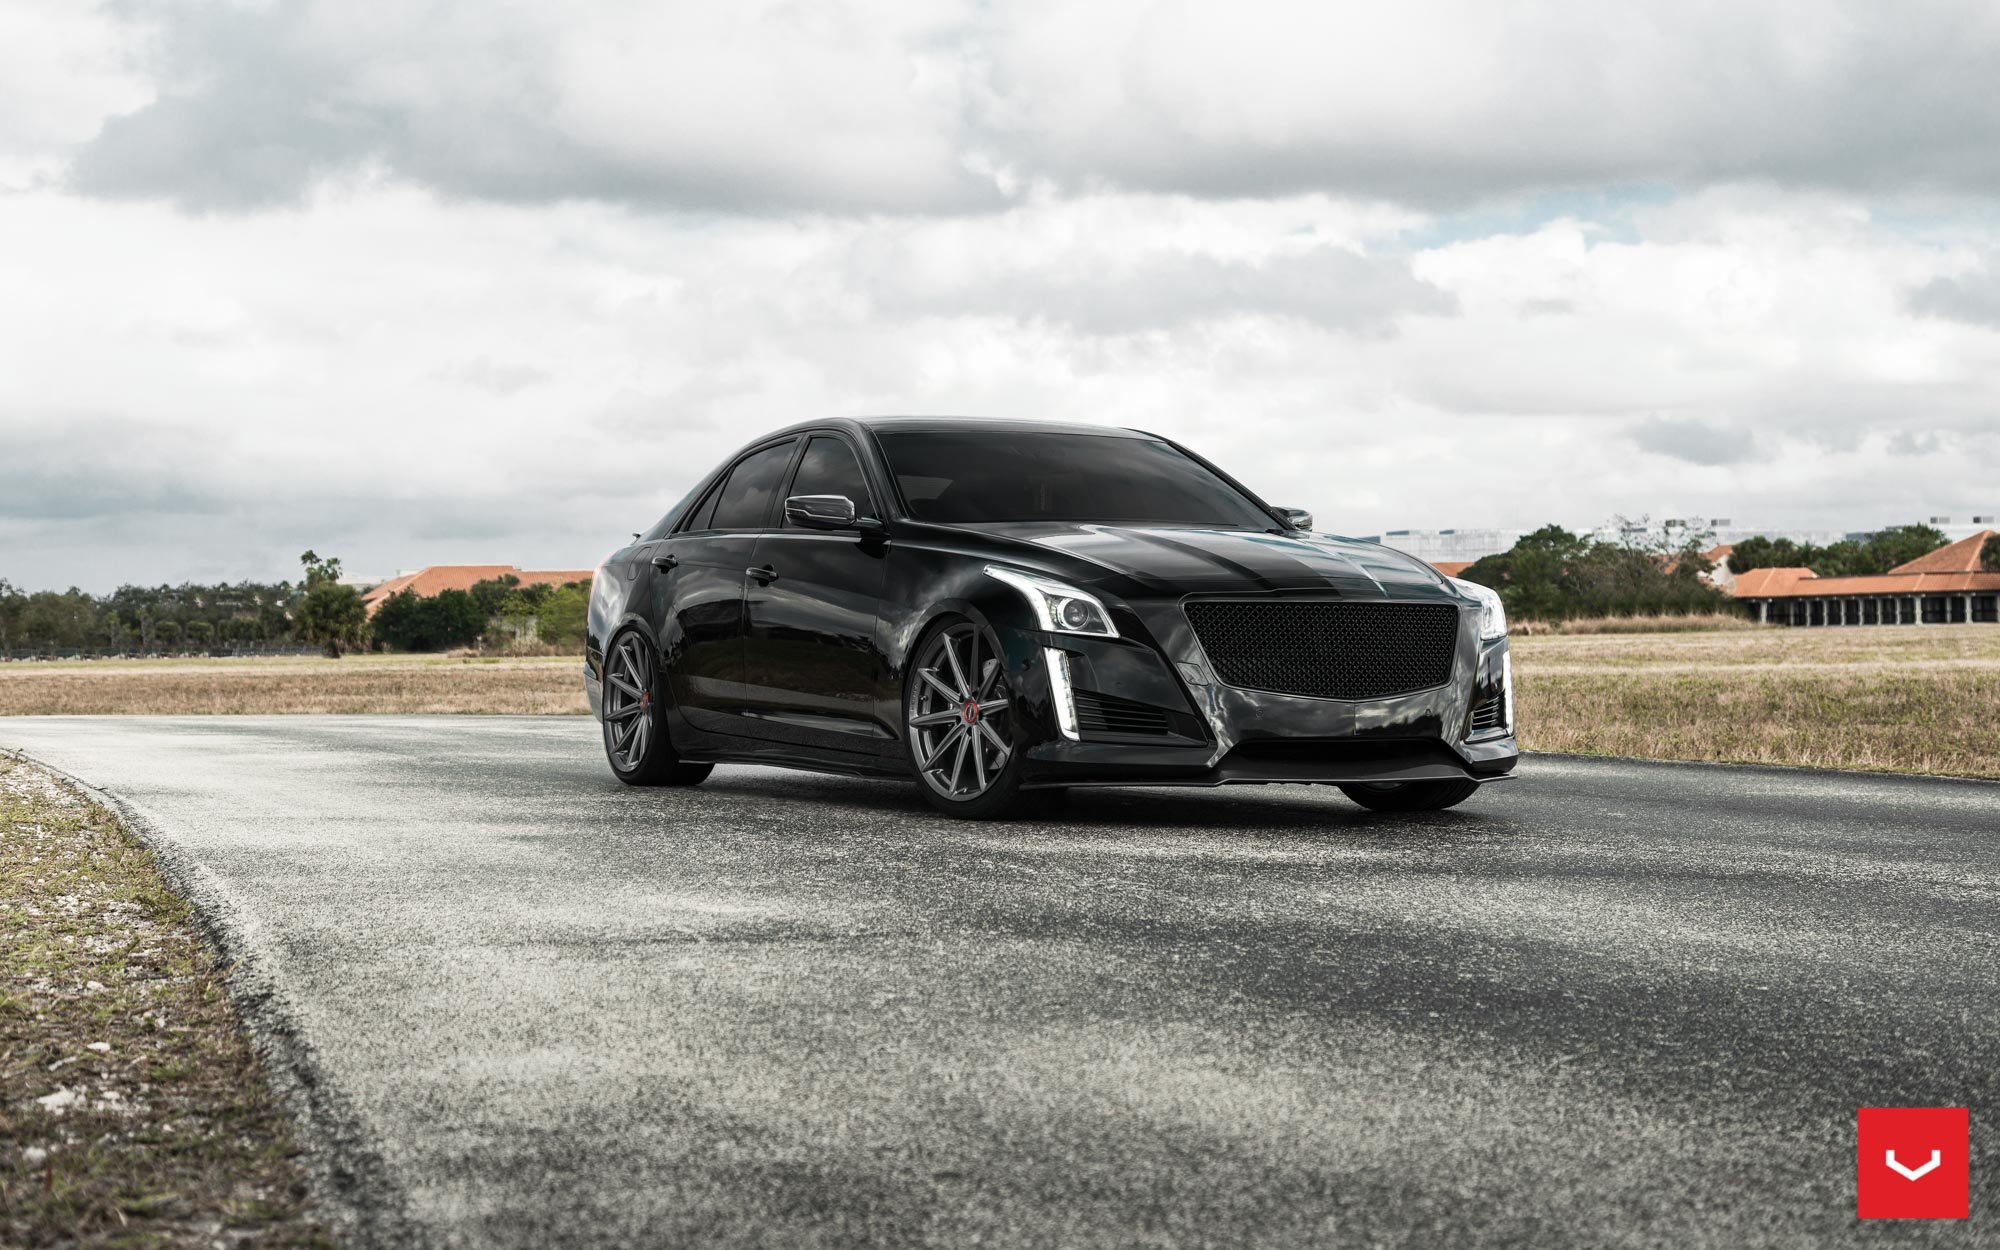 Black Cadillac CTS with Aftermarket Mesh Grille - Photo by Vossen.